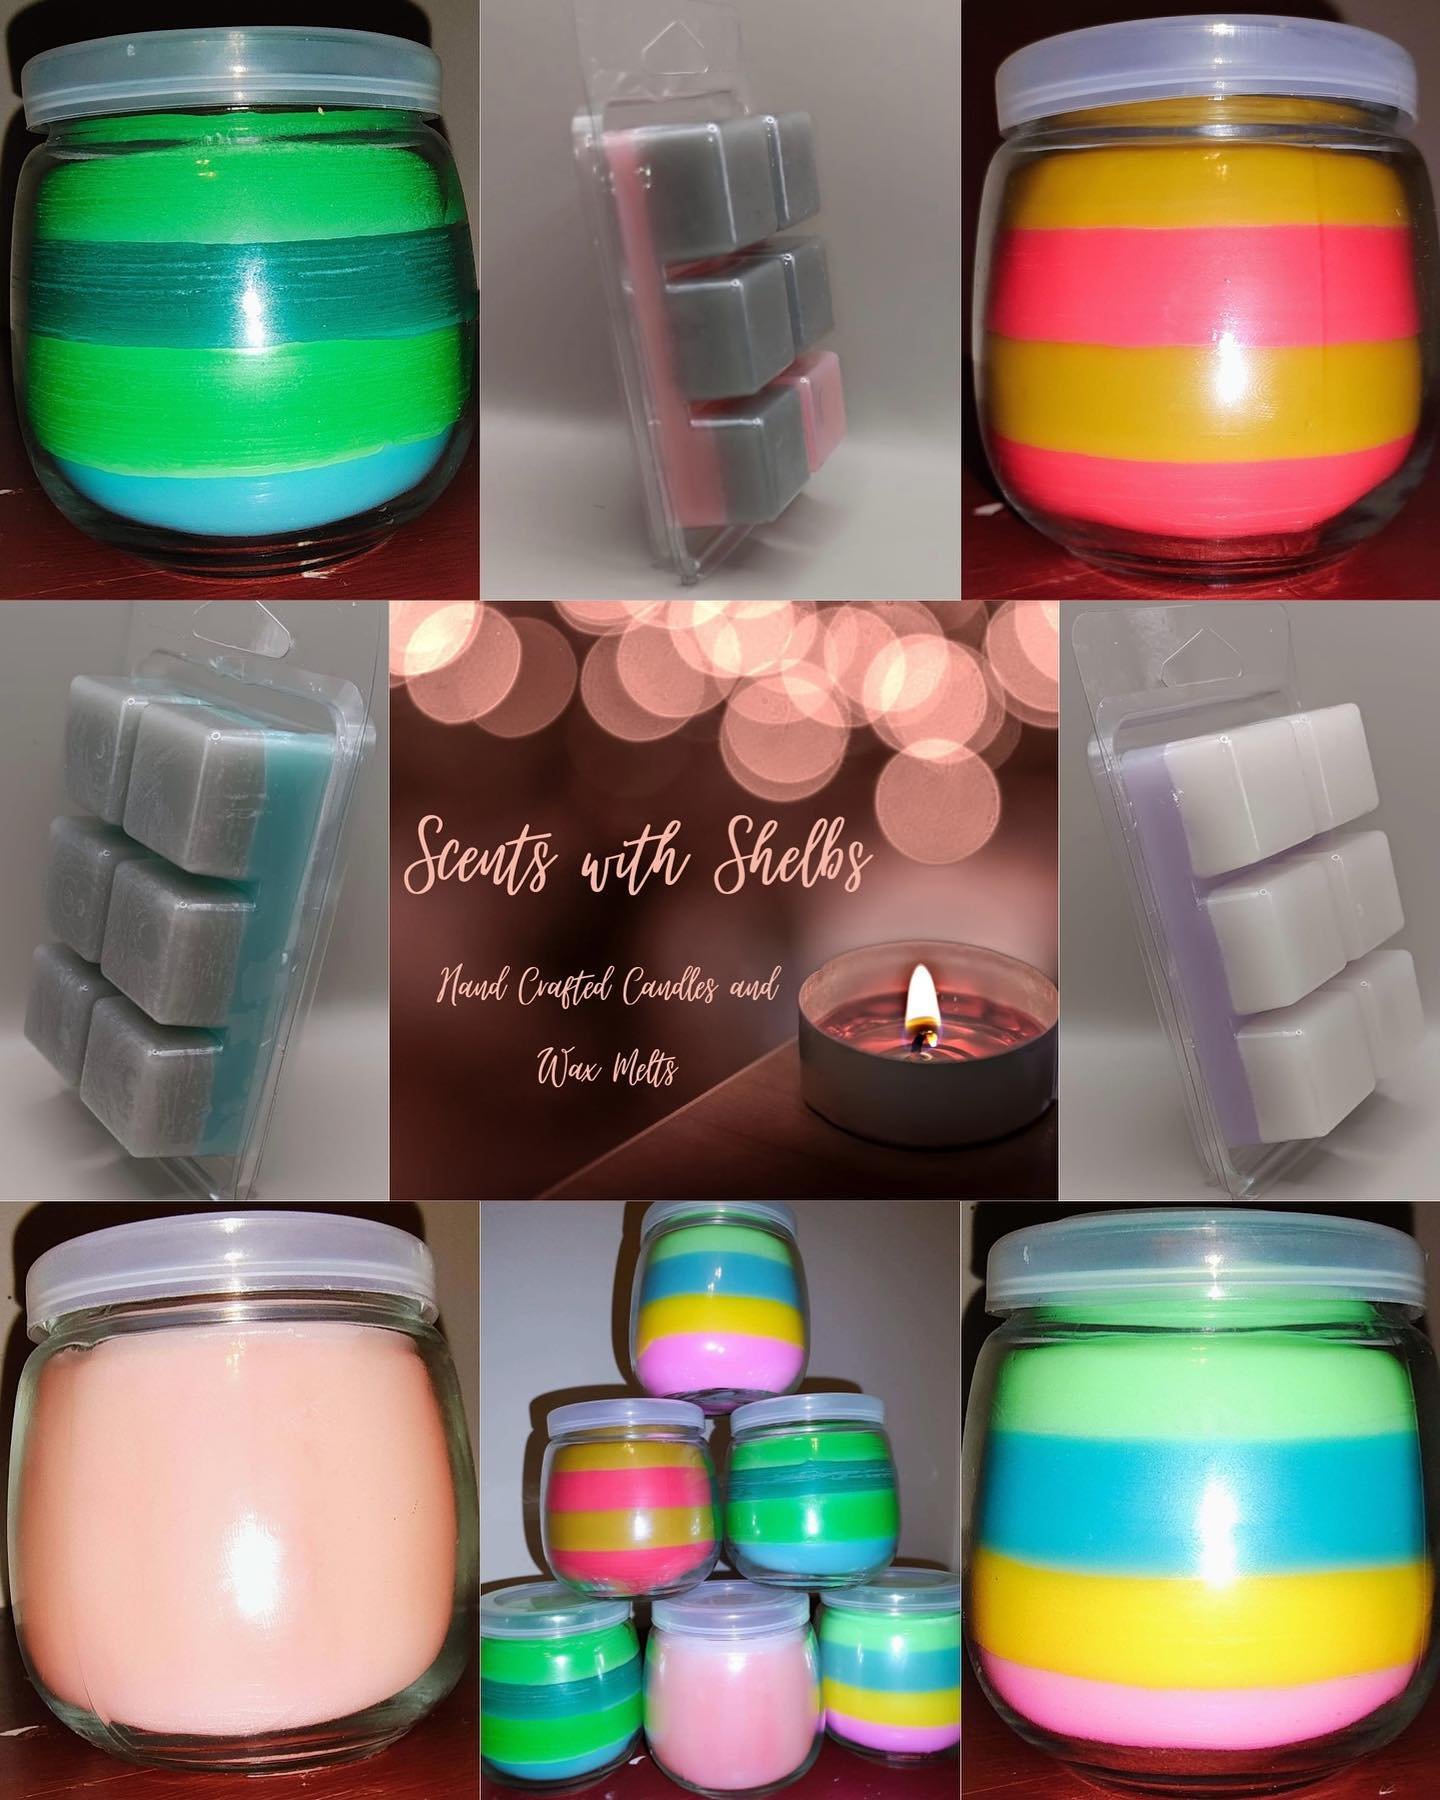 Scents With Shelbs will be vending with us June 2nd! 

They will have a variety of wonderful smelling candles &amp; wax melts that are sure to leave your home smelling amazing. 

Make sure to stop by and smell the candles! #candles #candlemaking #can